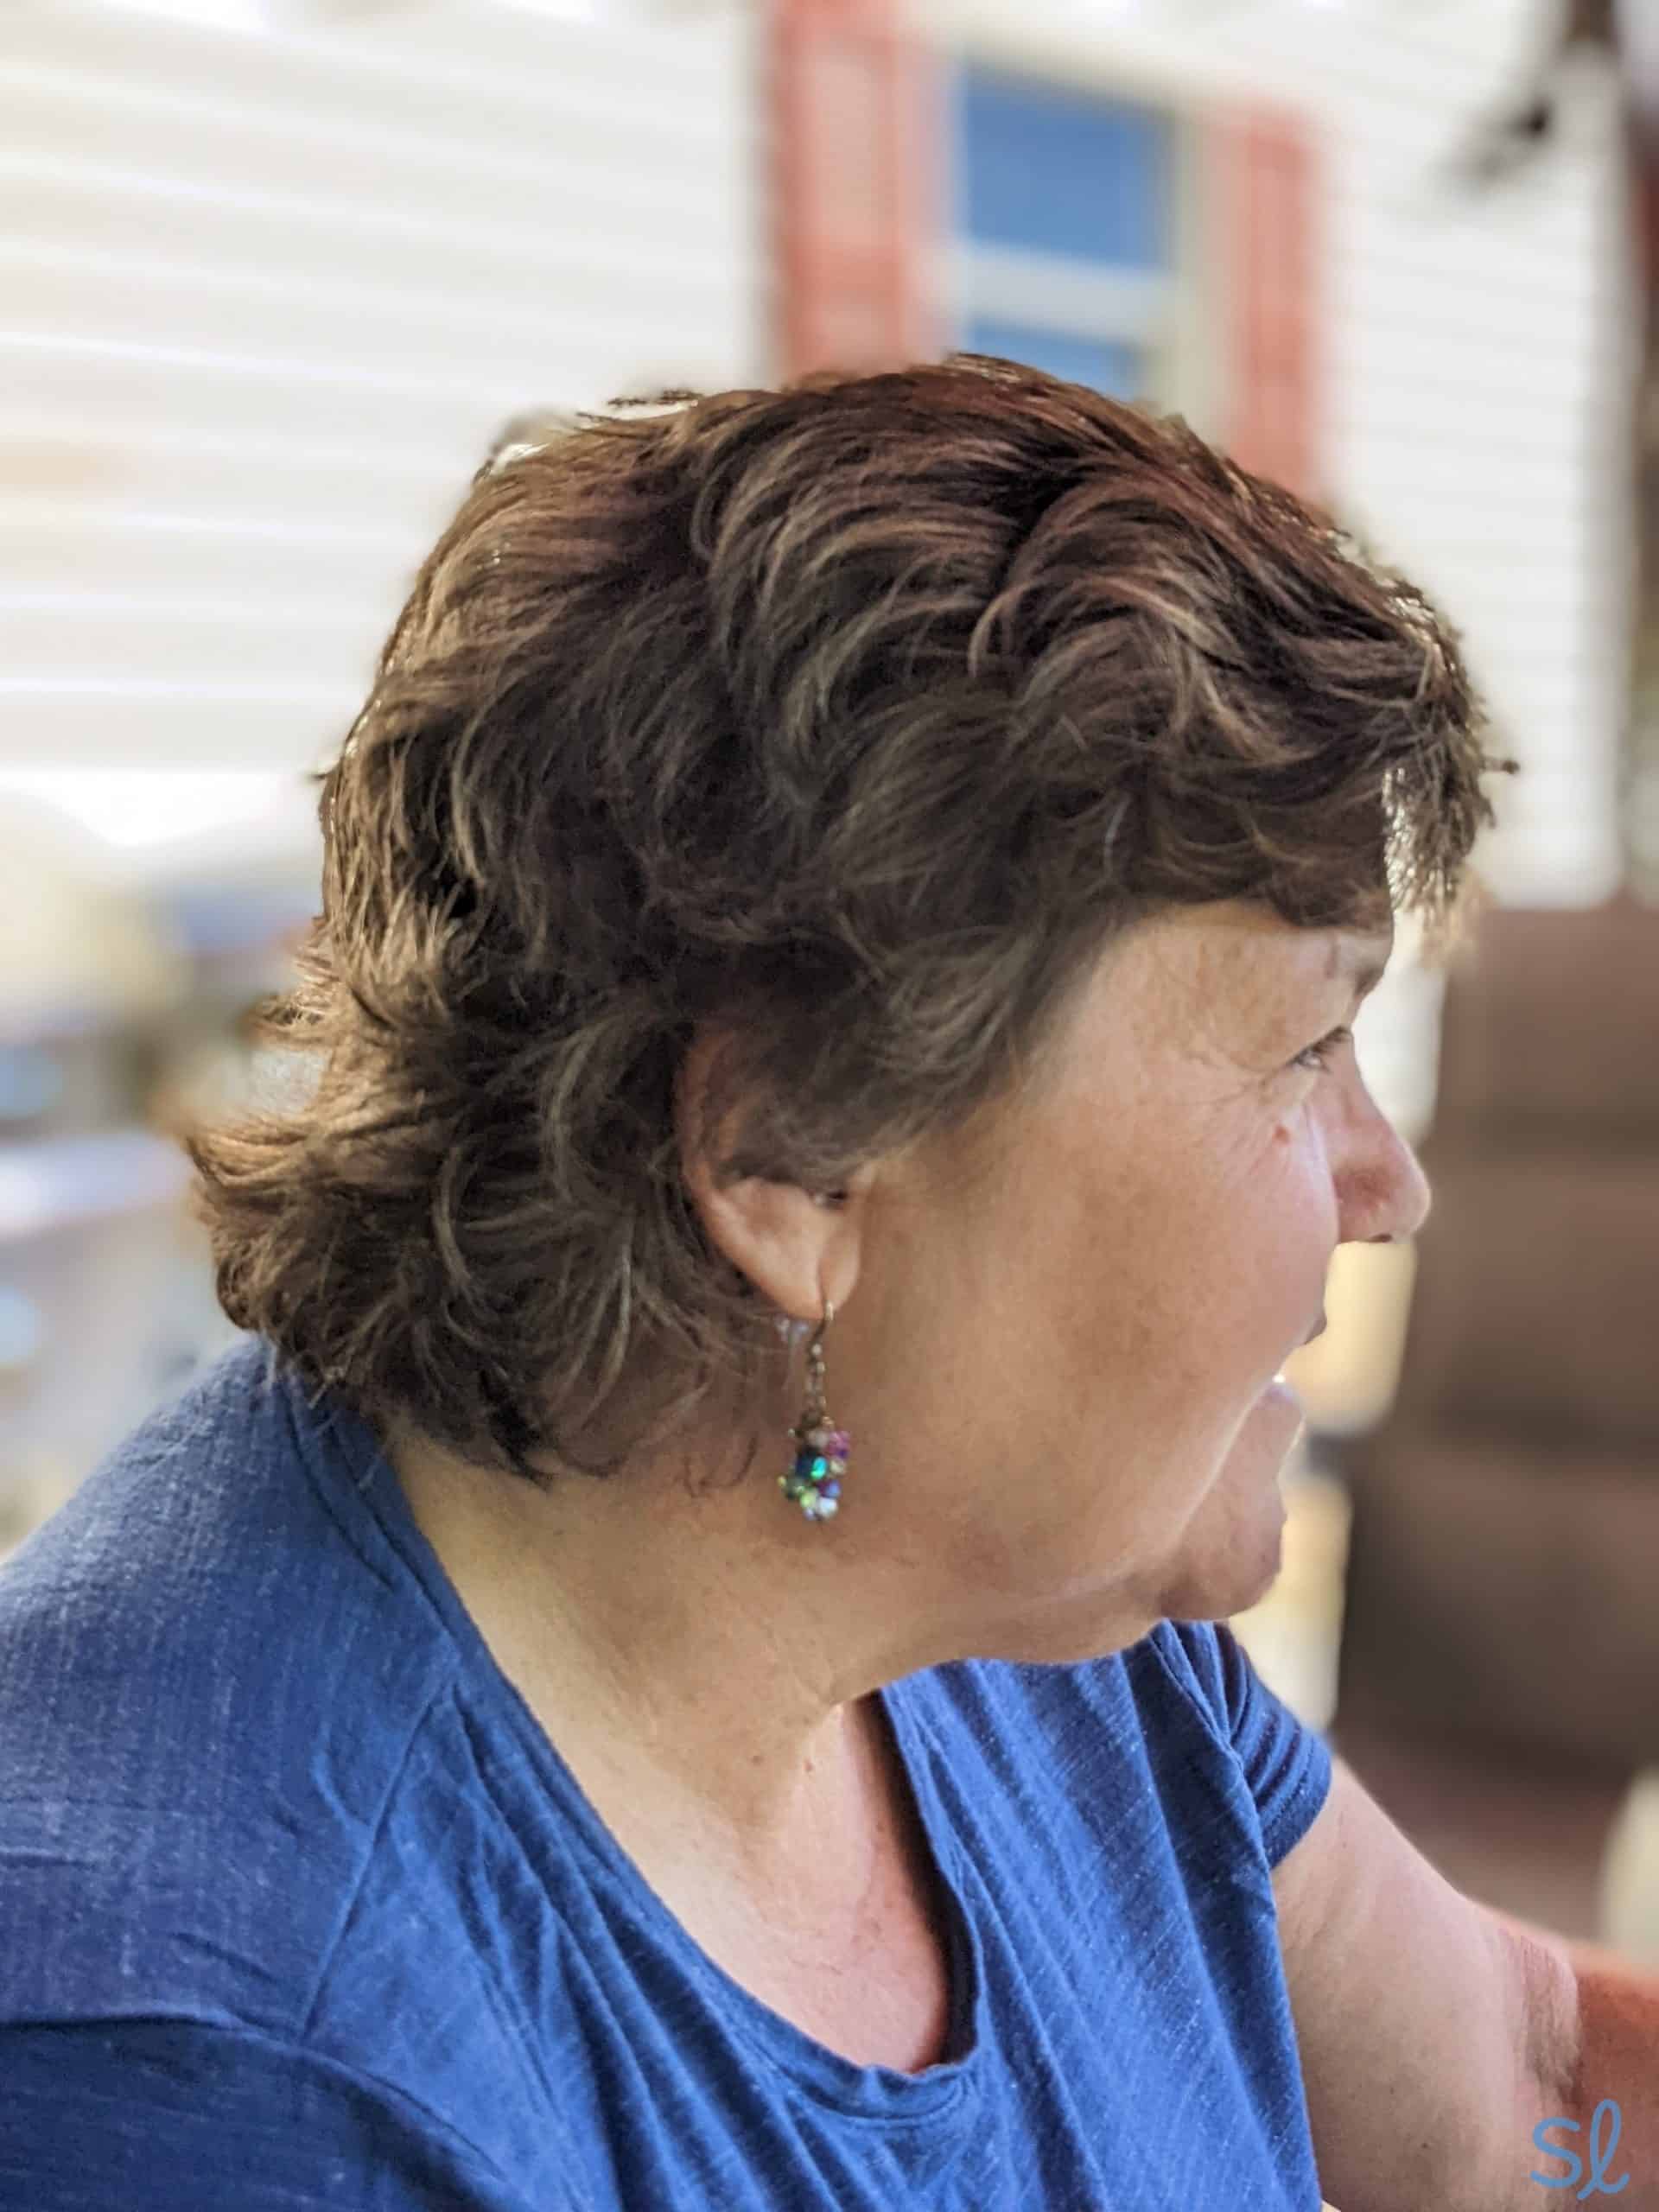 Side view of person wearing Atom Pro Hearing Aids